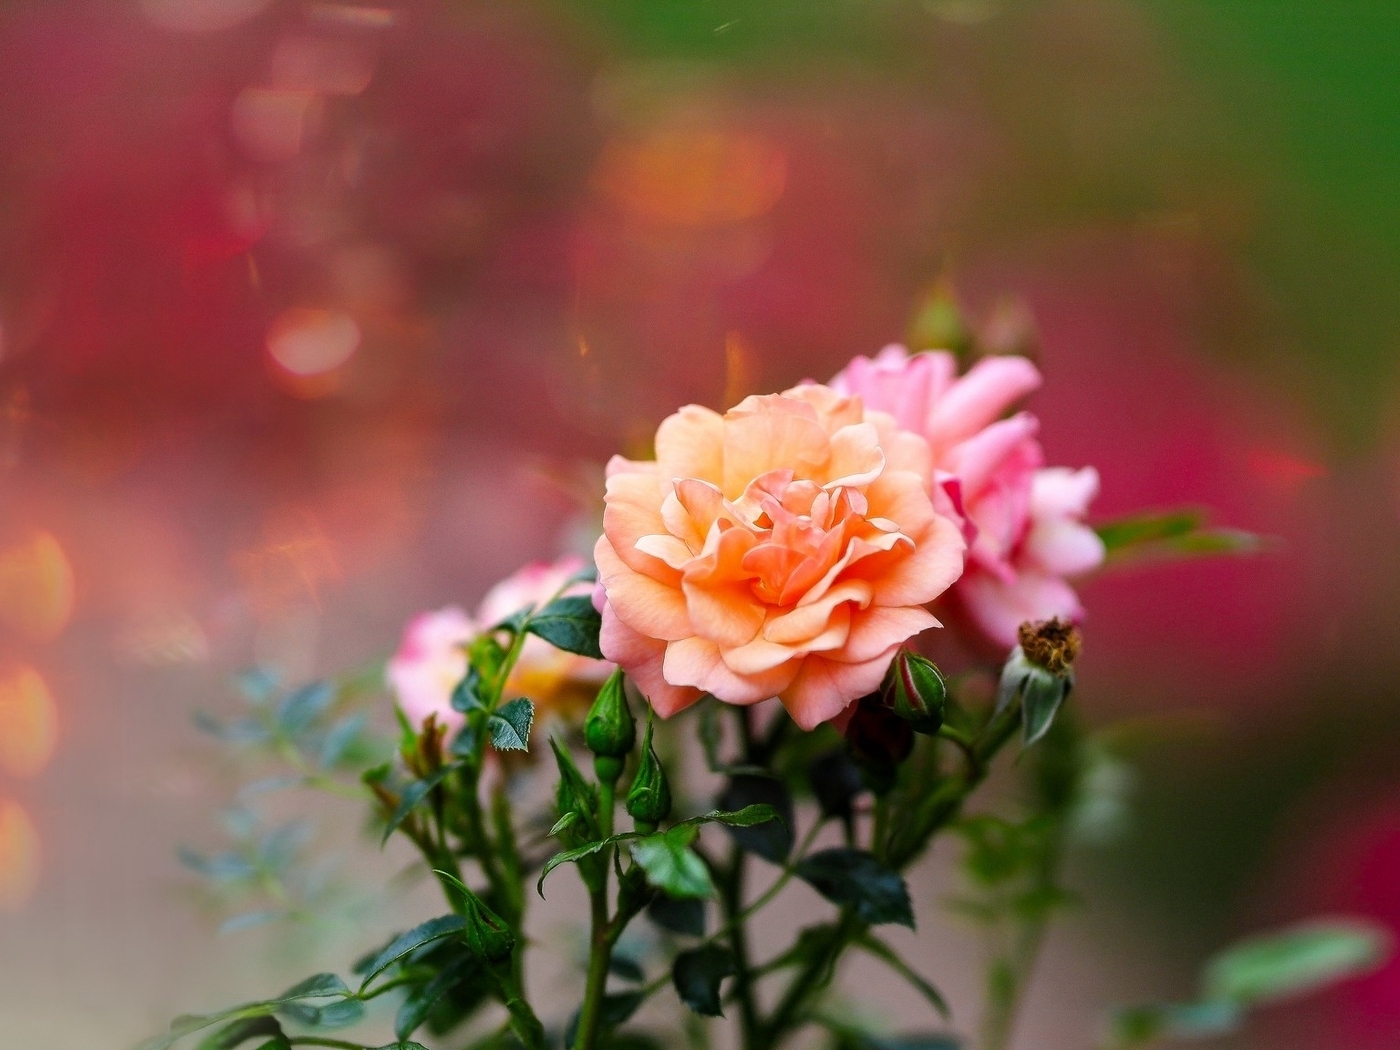 Image: Roses, flowers, beautiful, blurred background